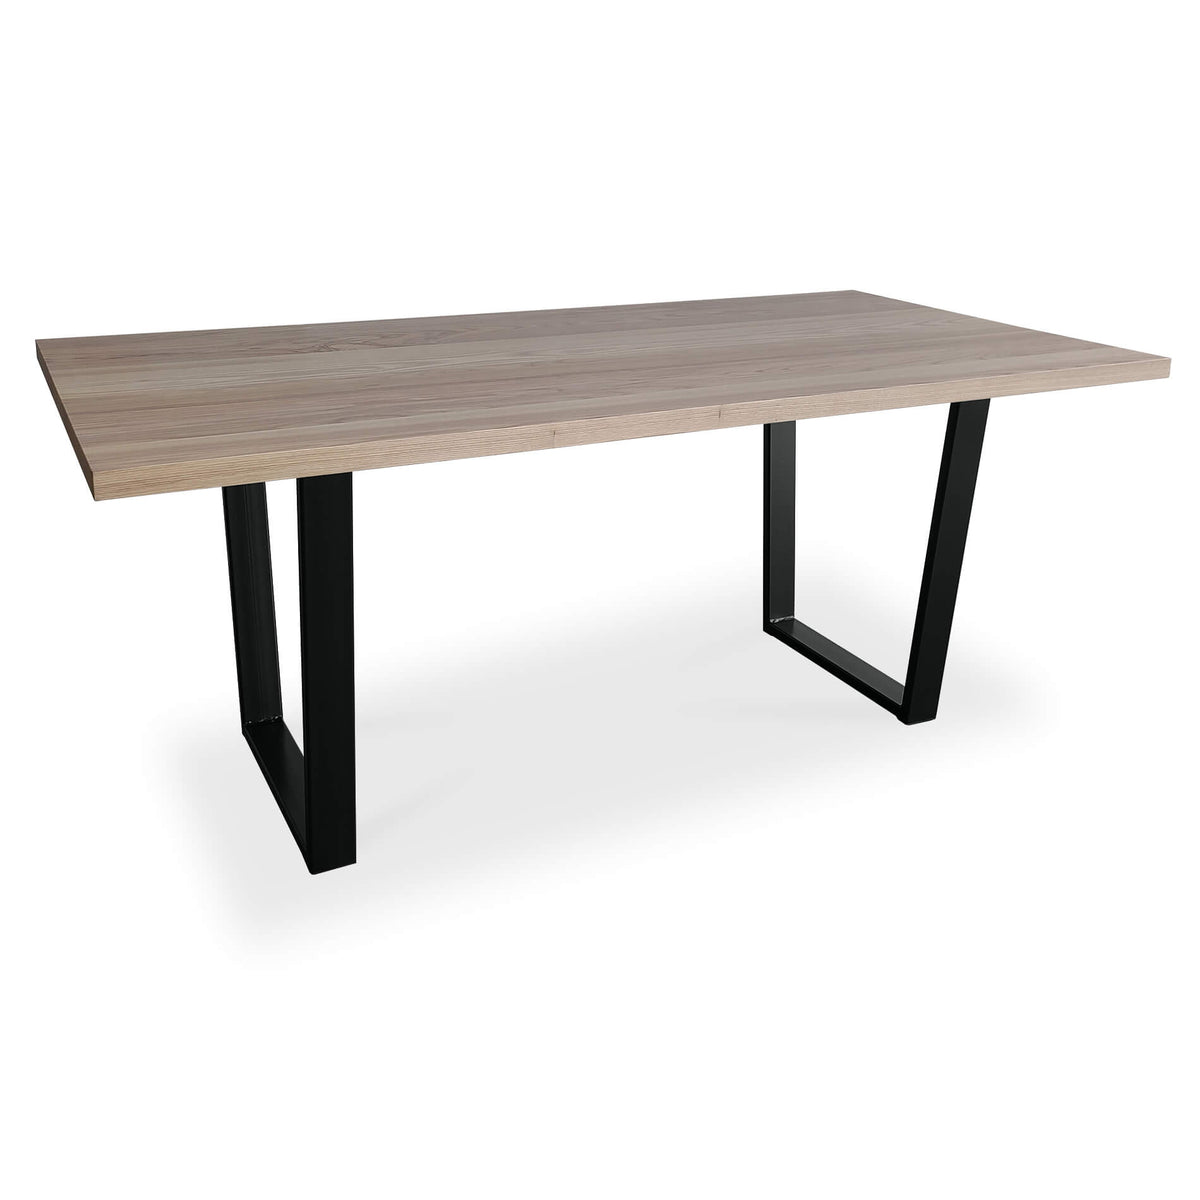 Davis Ash Dining Table - Made in Canada